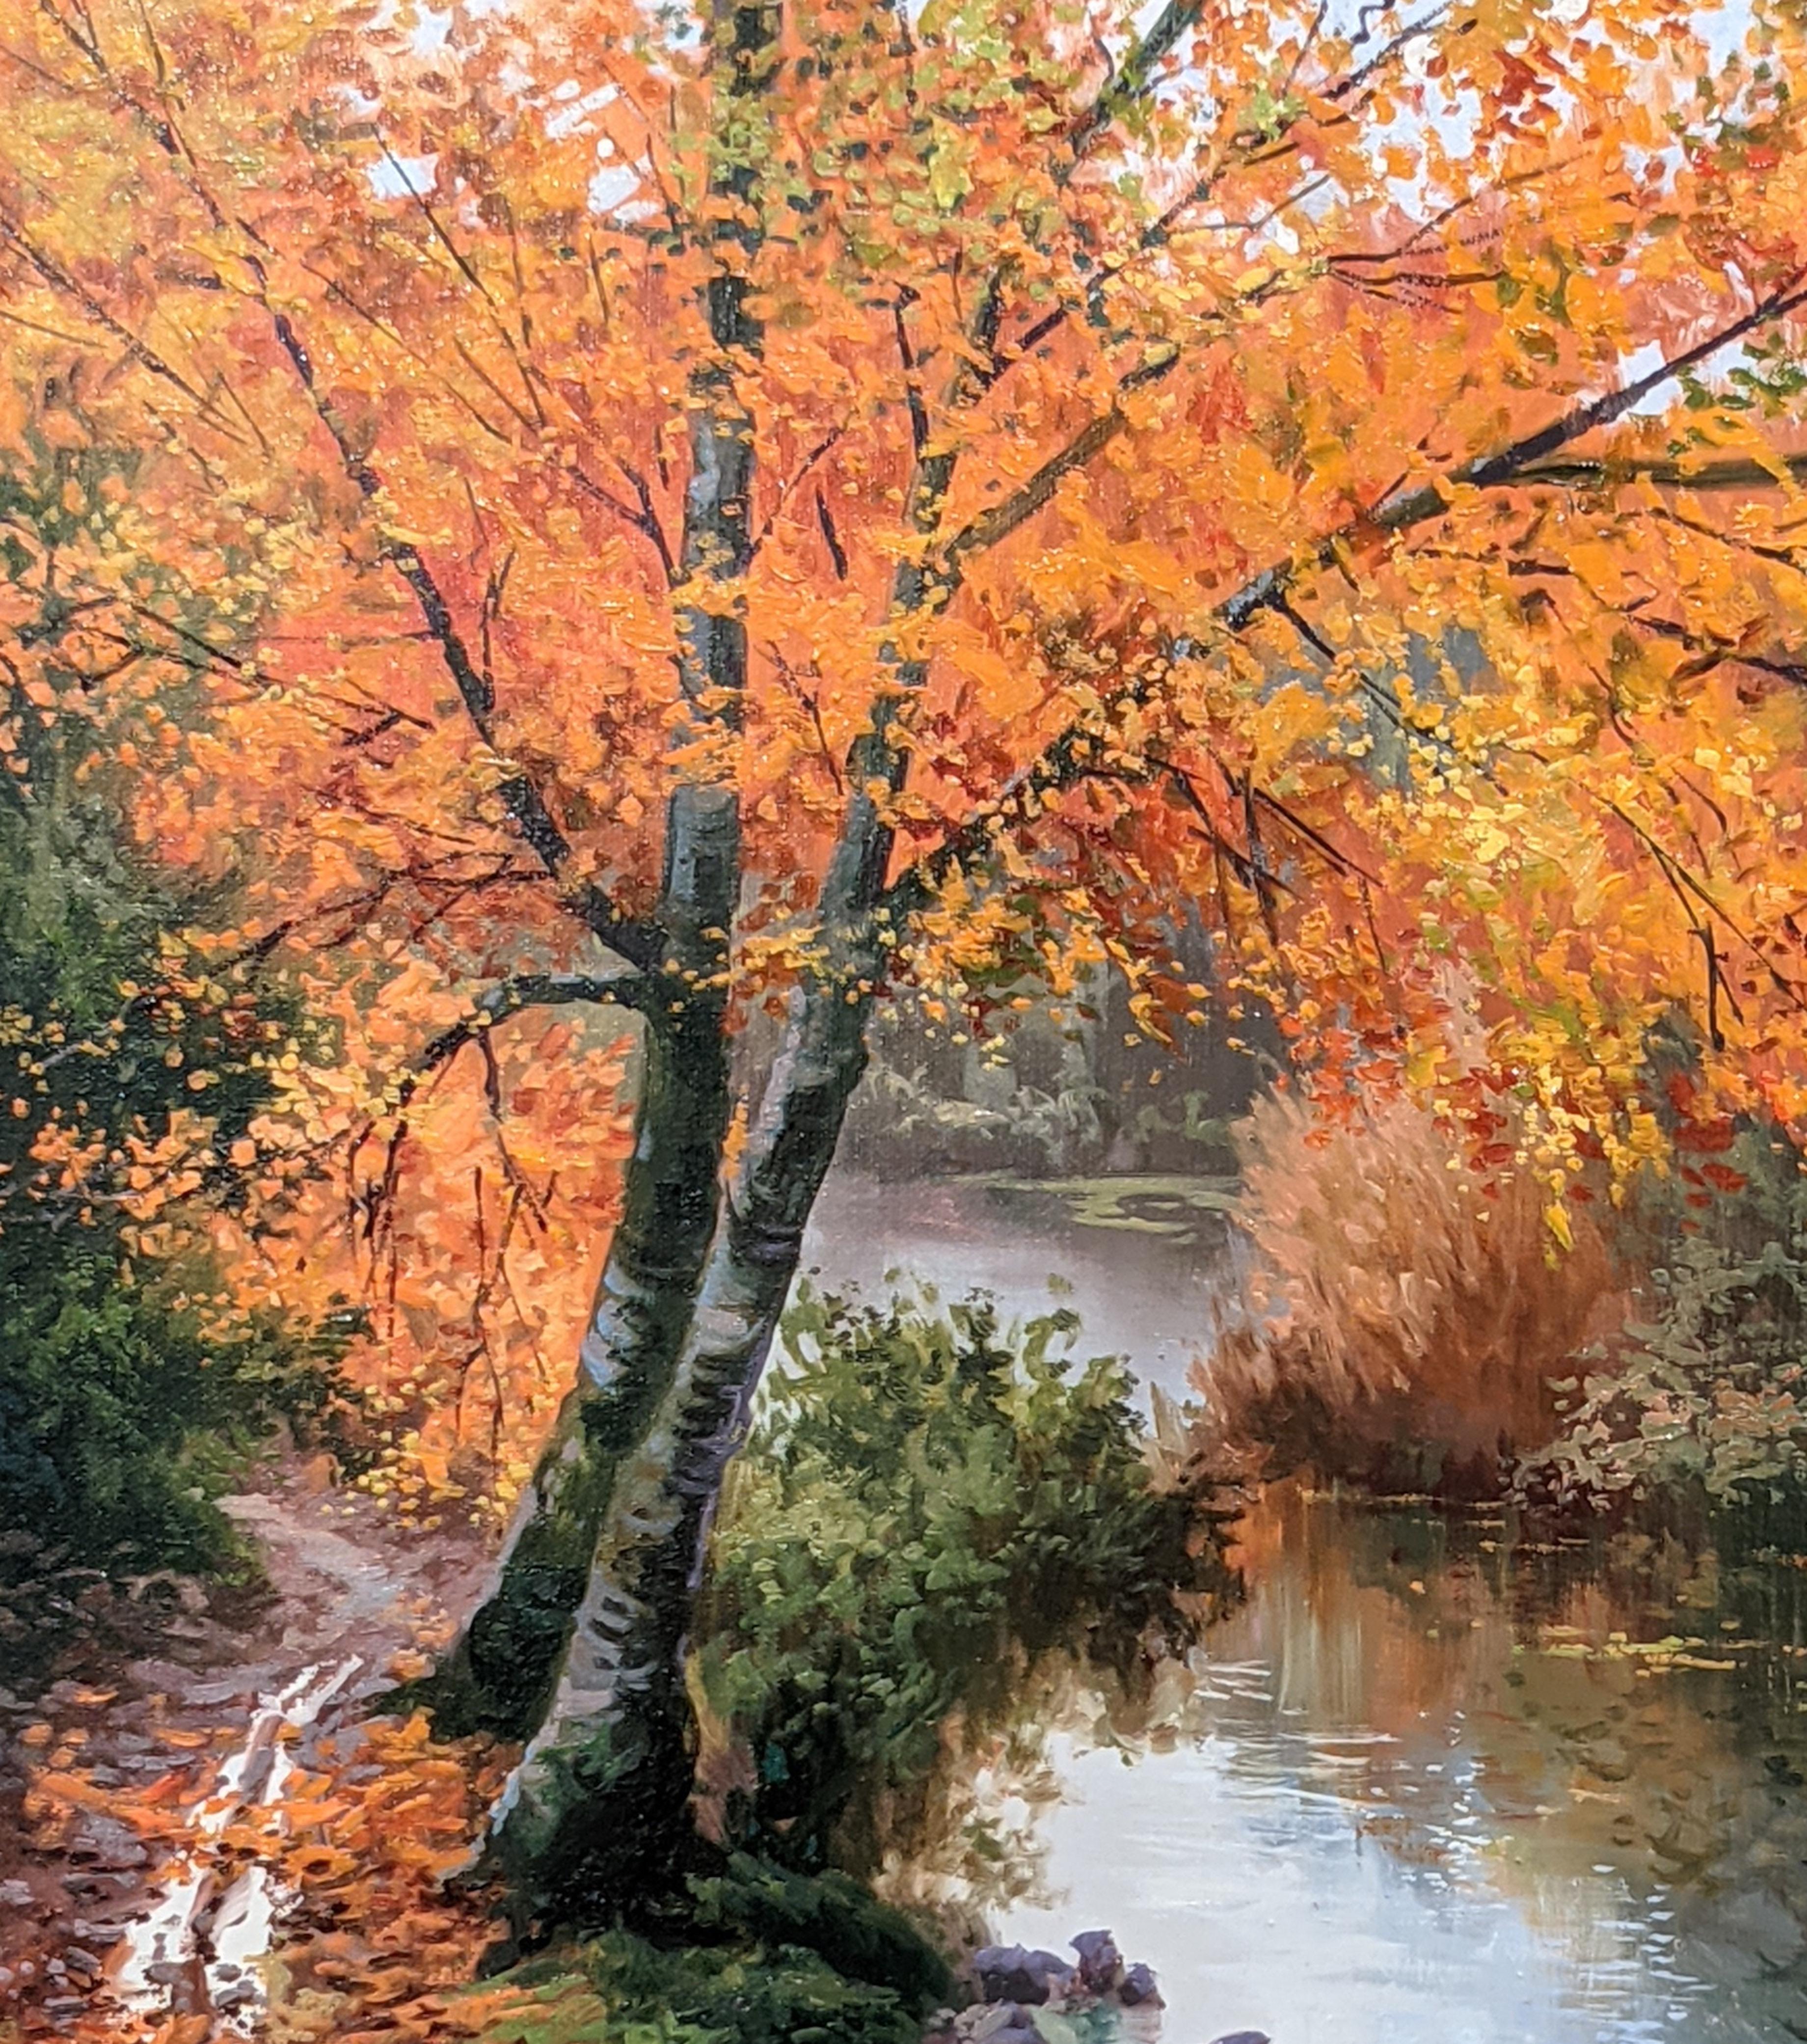 'Riverside Stroll' by Amal Amatt. A Red & Orange  Contemporary landscape painting of a river and incredibly detailed trees. 

Amatt was born in the hot arid climate of Southern Spain but fell in love with lush landscape of woodland and mountains of